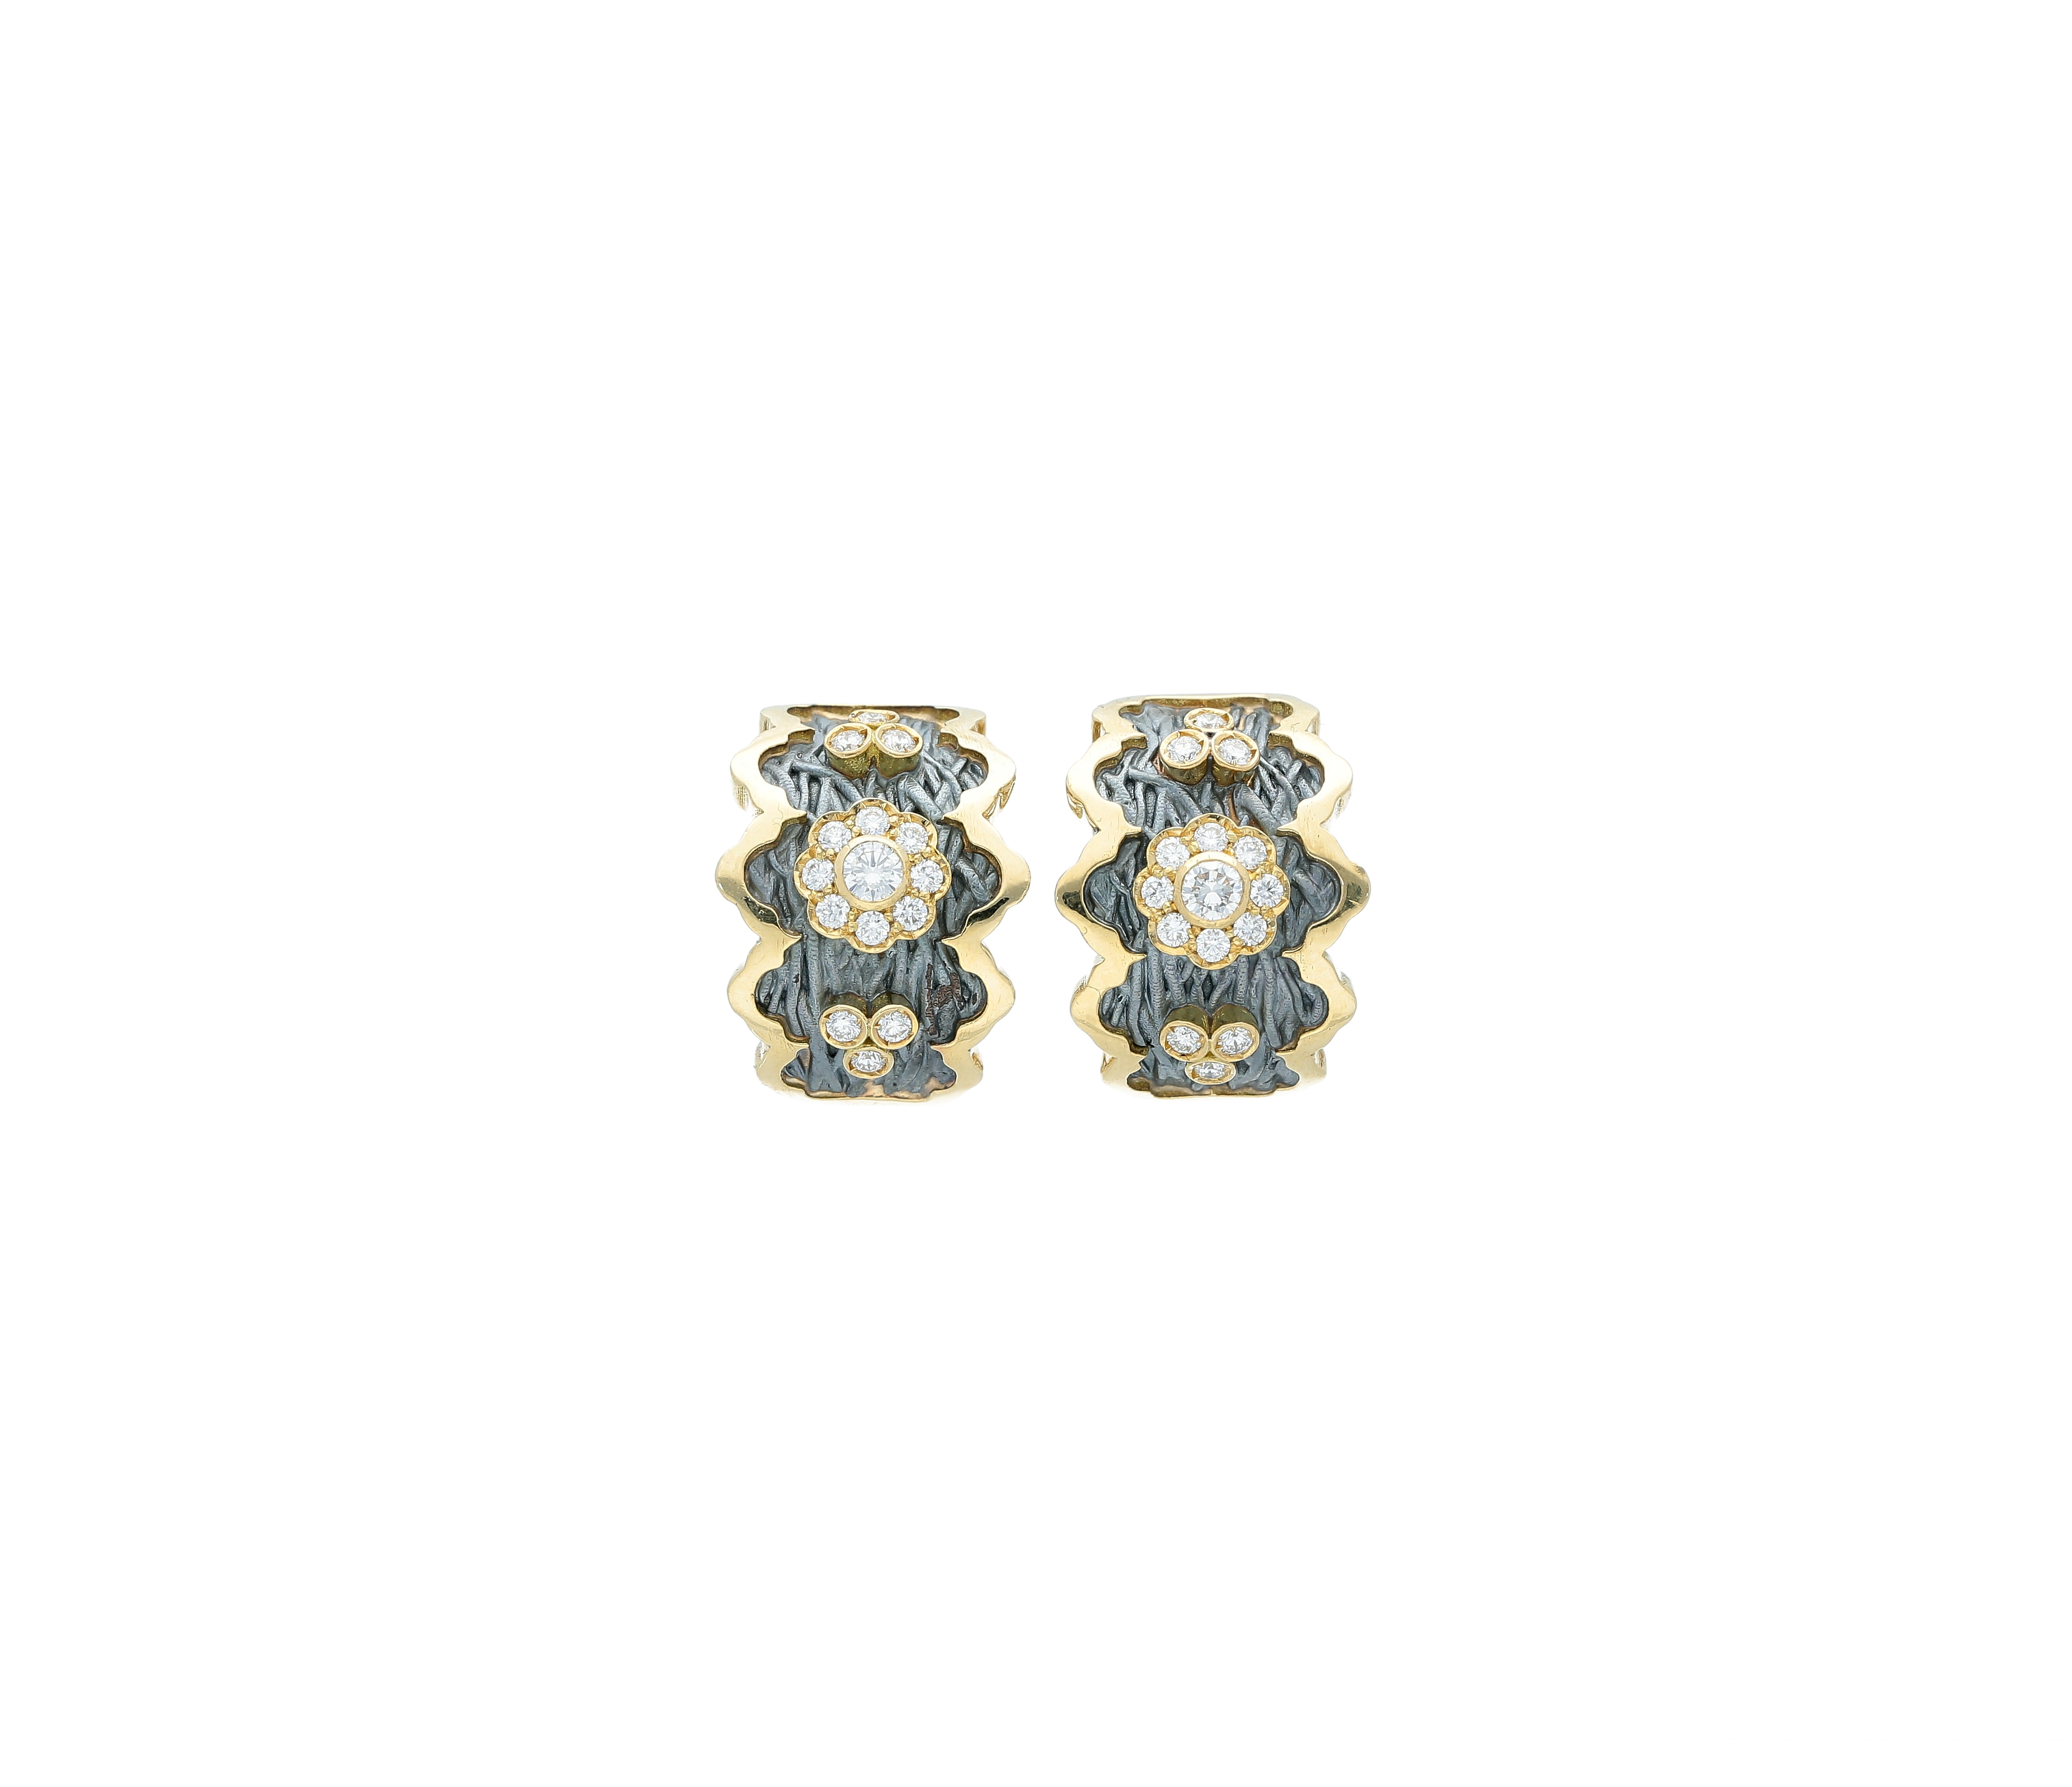 Roots Collection Flower design earrings in yellow gold 18kt and oxidized silver with diamonds